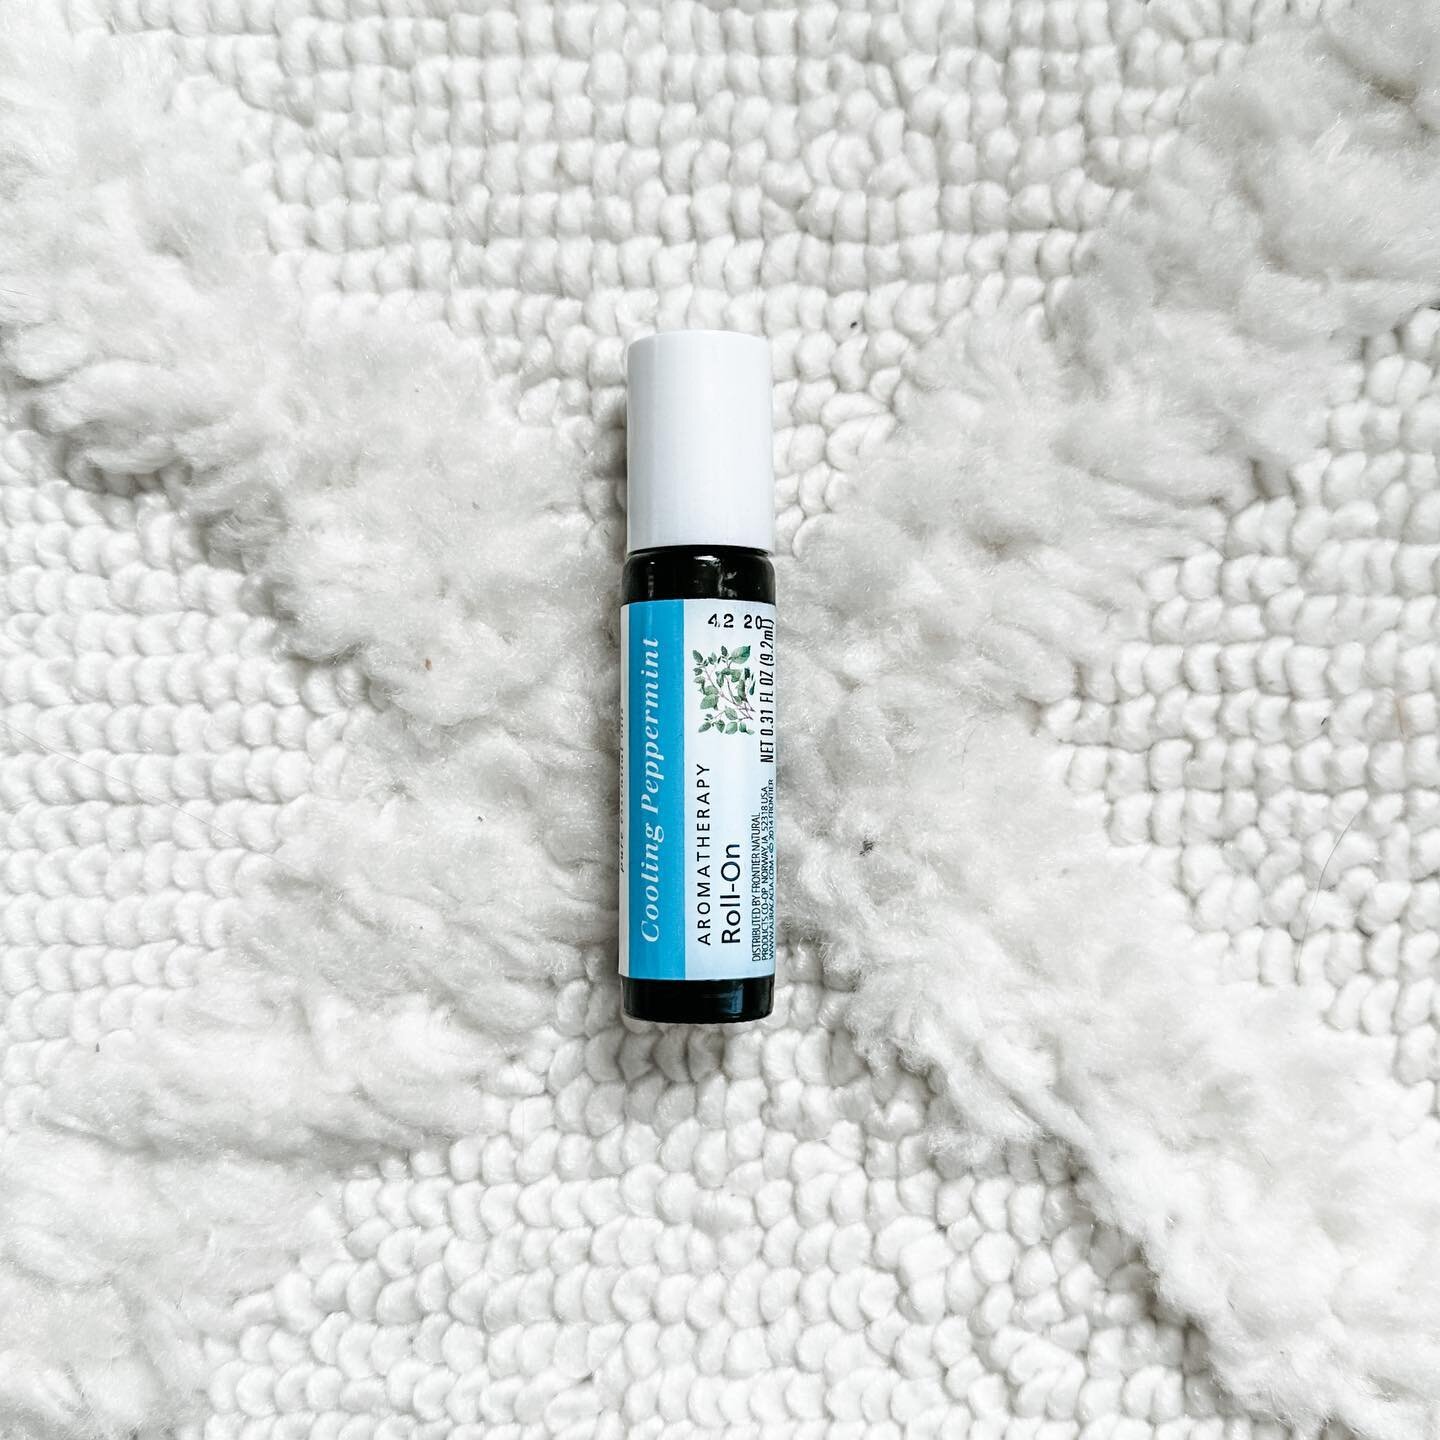 💼Doula Bag Fave: Peppermint Essential Oil

My peppermint roller is something I always grab when a mama in labor (usually around transition and/or pushing) feels super nauseous and thinks she may throw up. A whiff of peppermint almost always does the